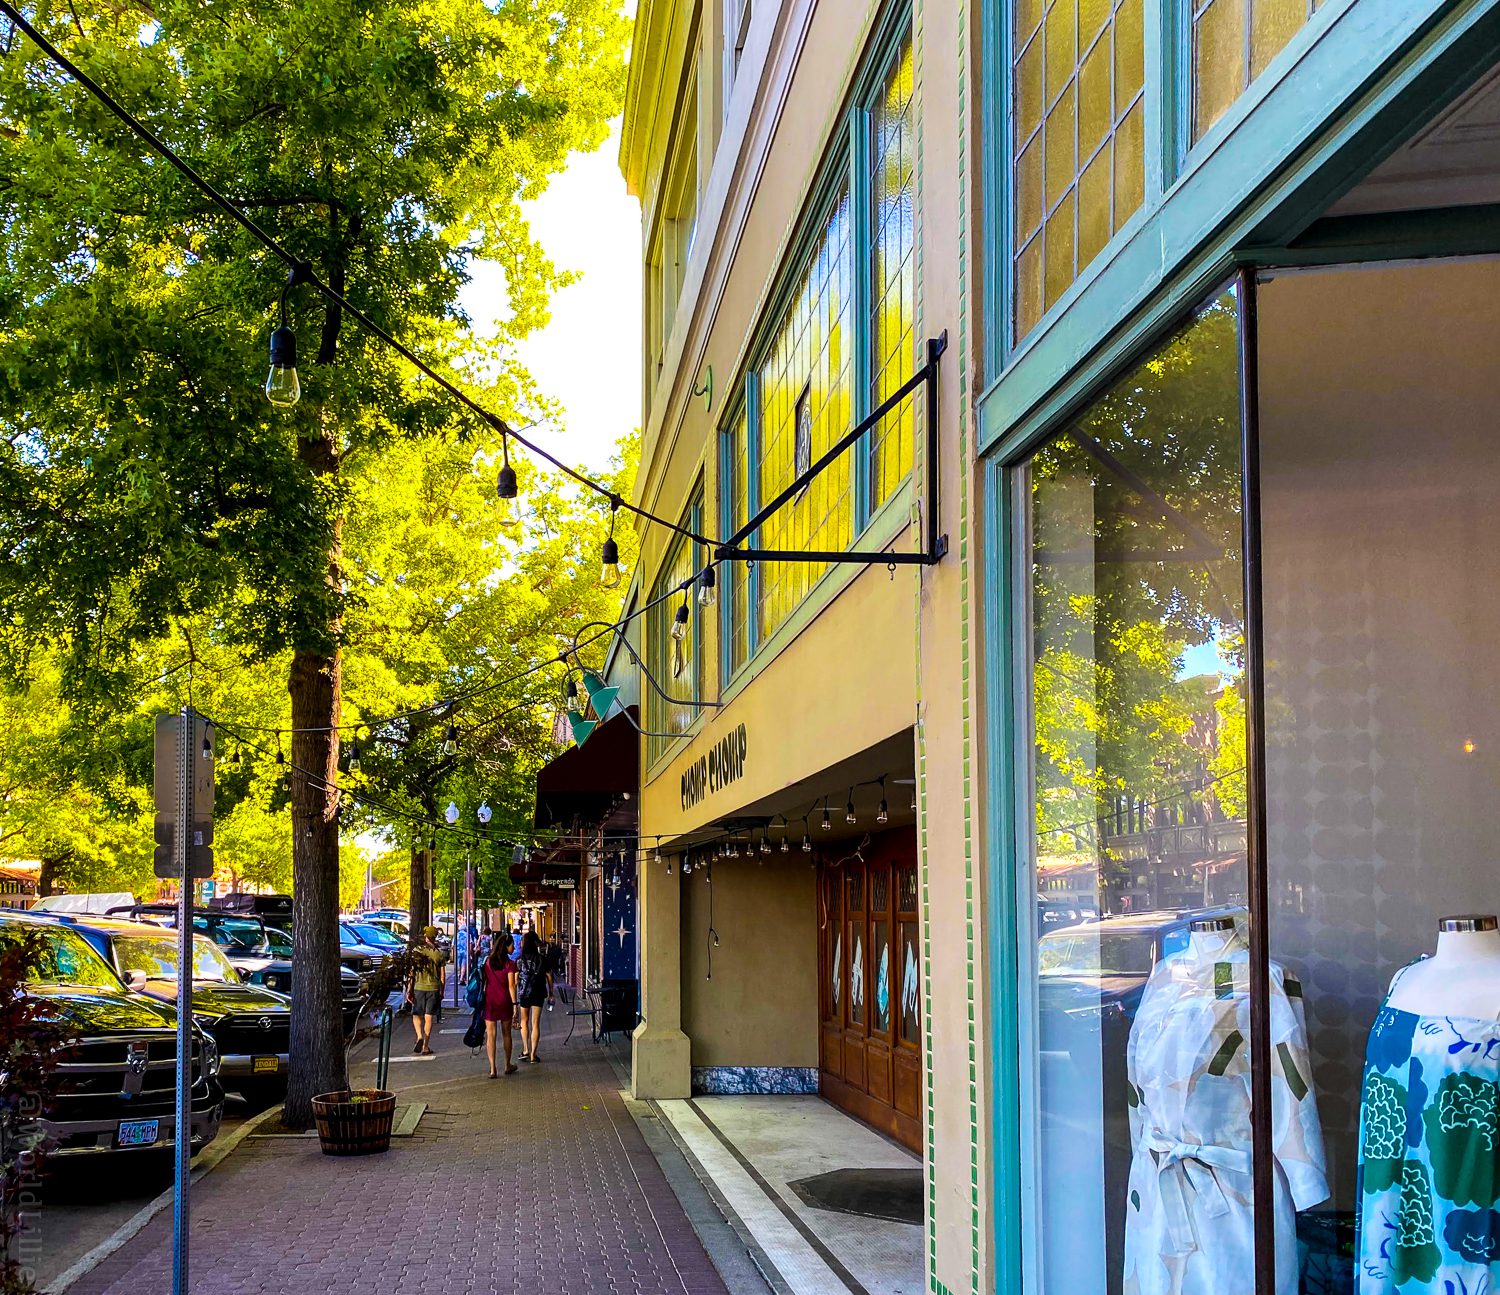 A tree-lined shopping street in Bend, Oregon.